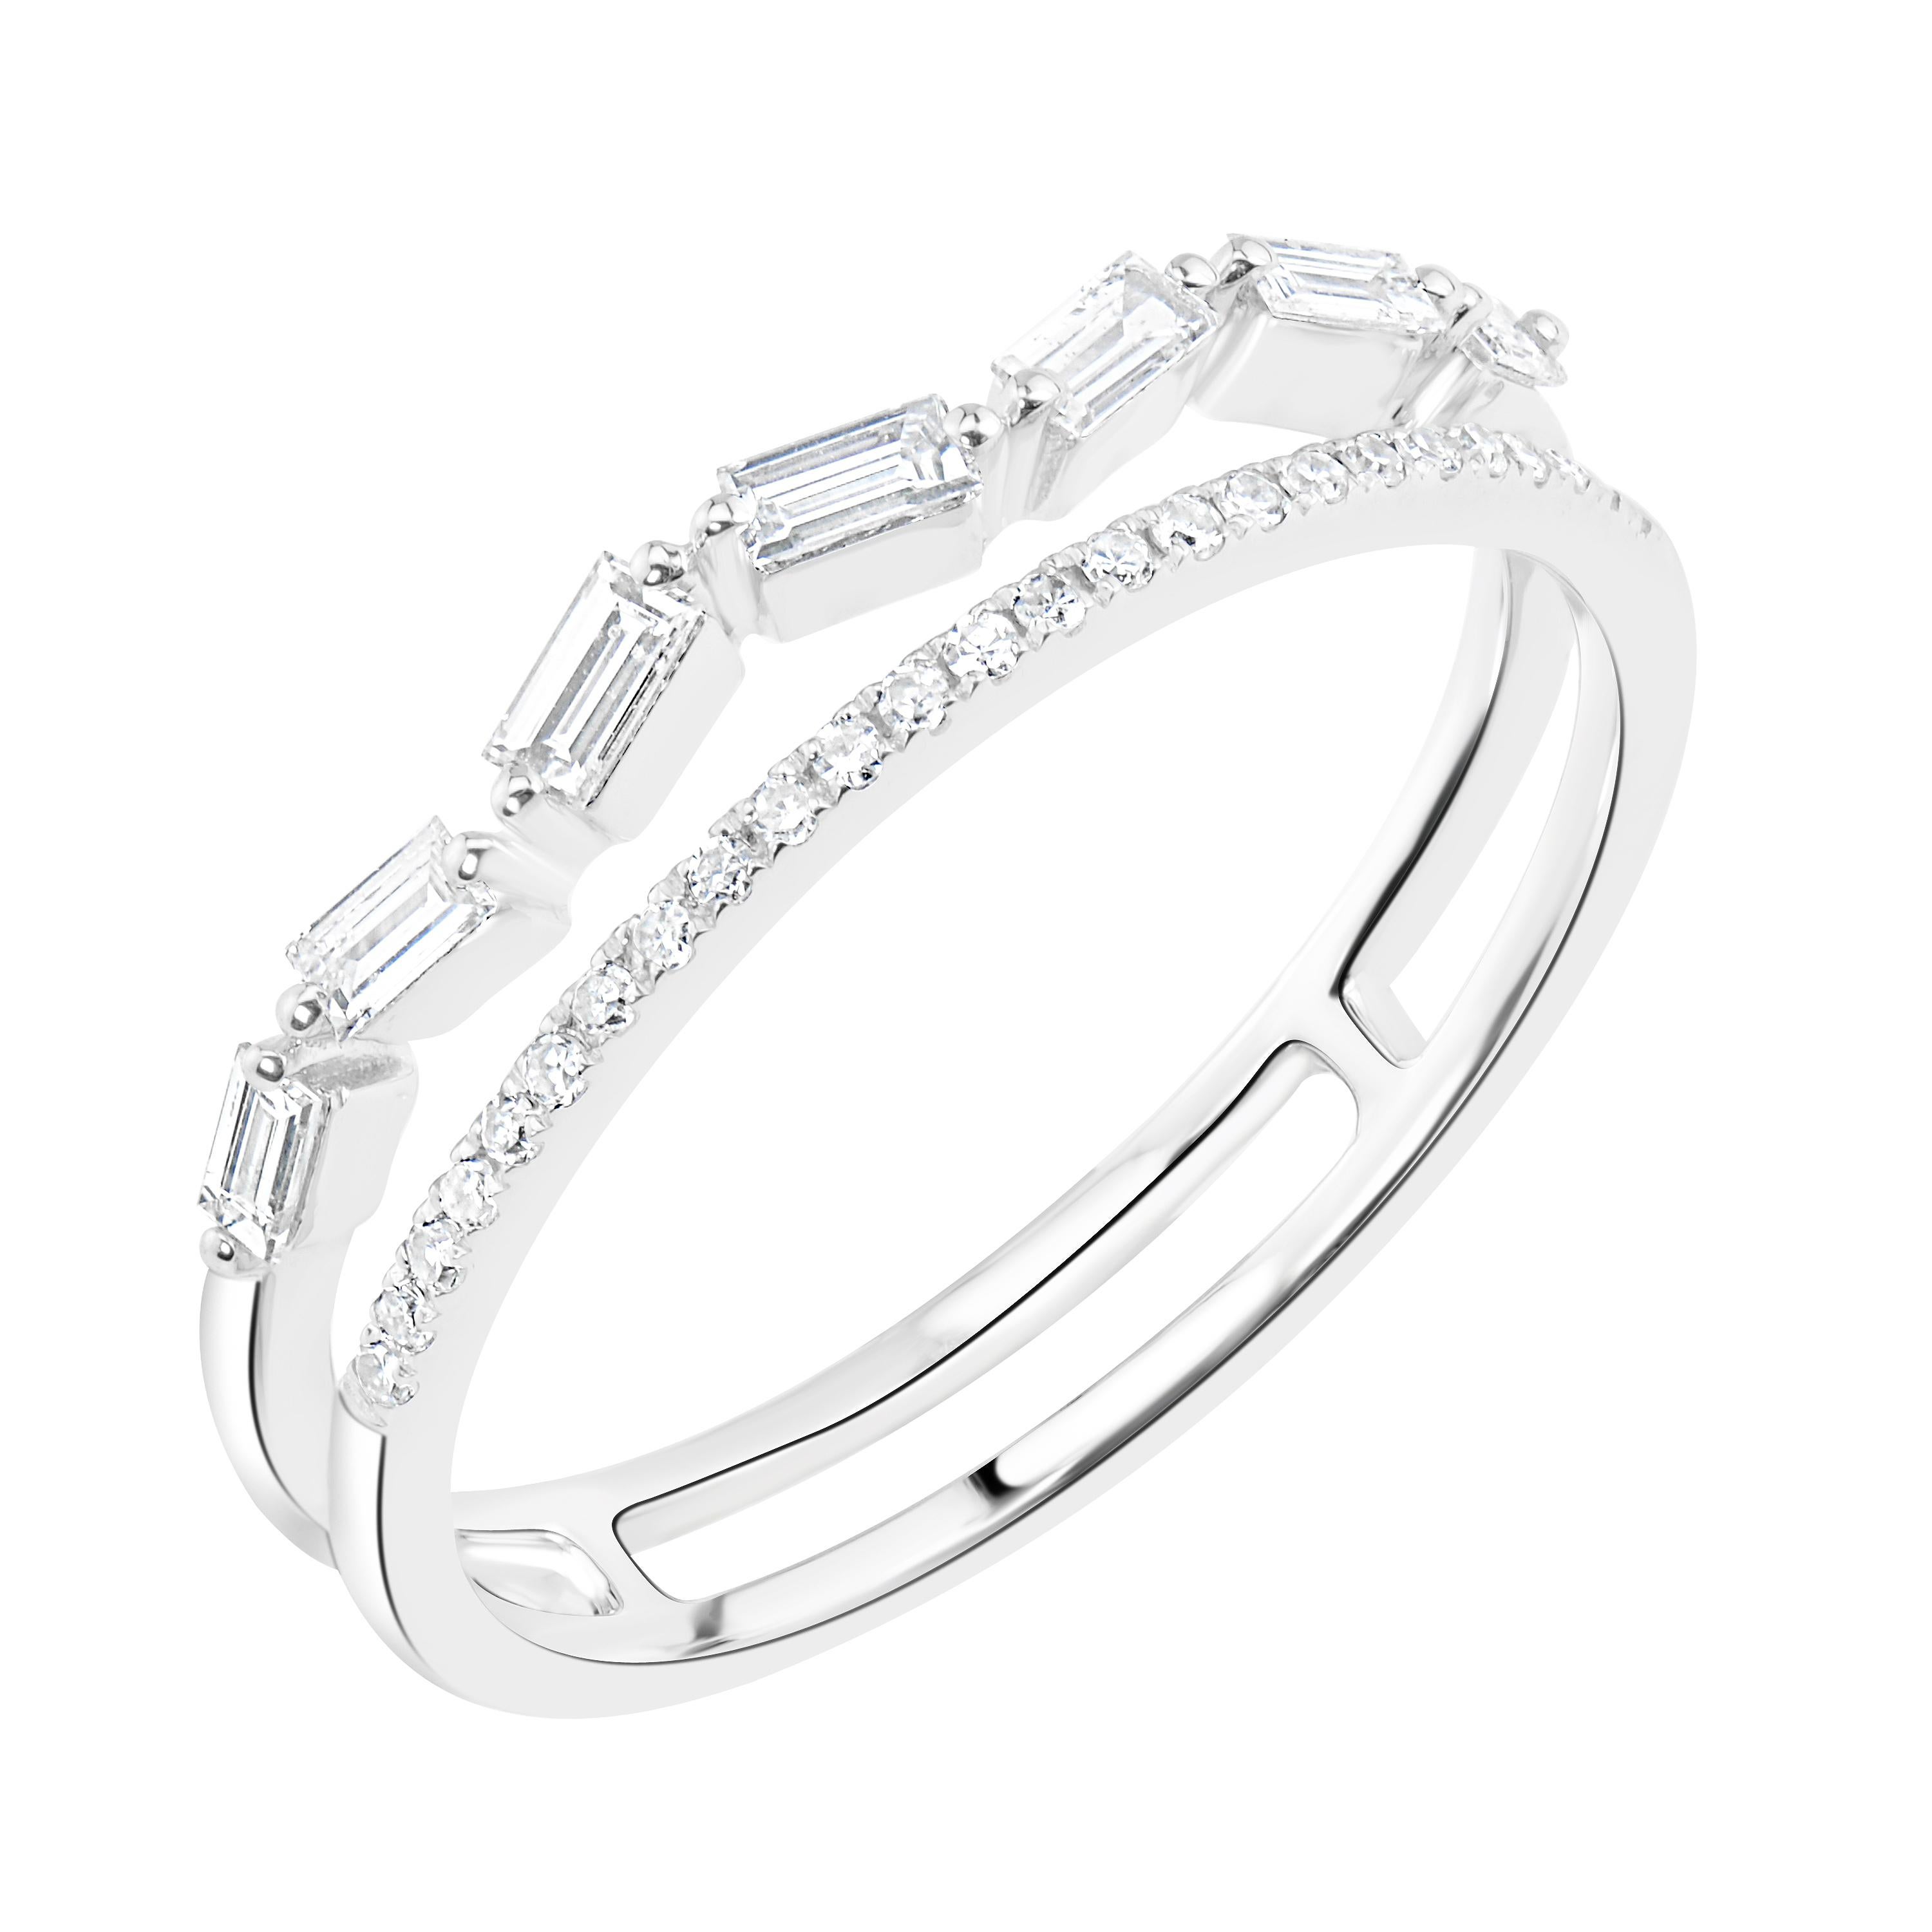 The Split Shank Band Ring hosts a beautiful display of sparkle. Rendered in 14K white gold, this Luxle band ring dazzles with 7 baguette diamonds and 25 pave set round diamonds in a chic split shank design. This white gold ring is showcased with